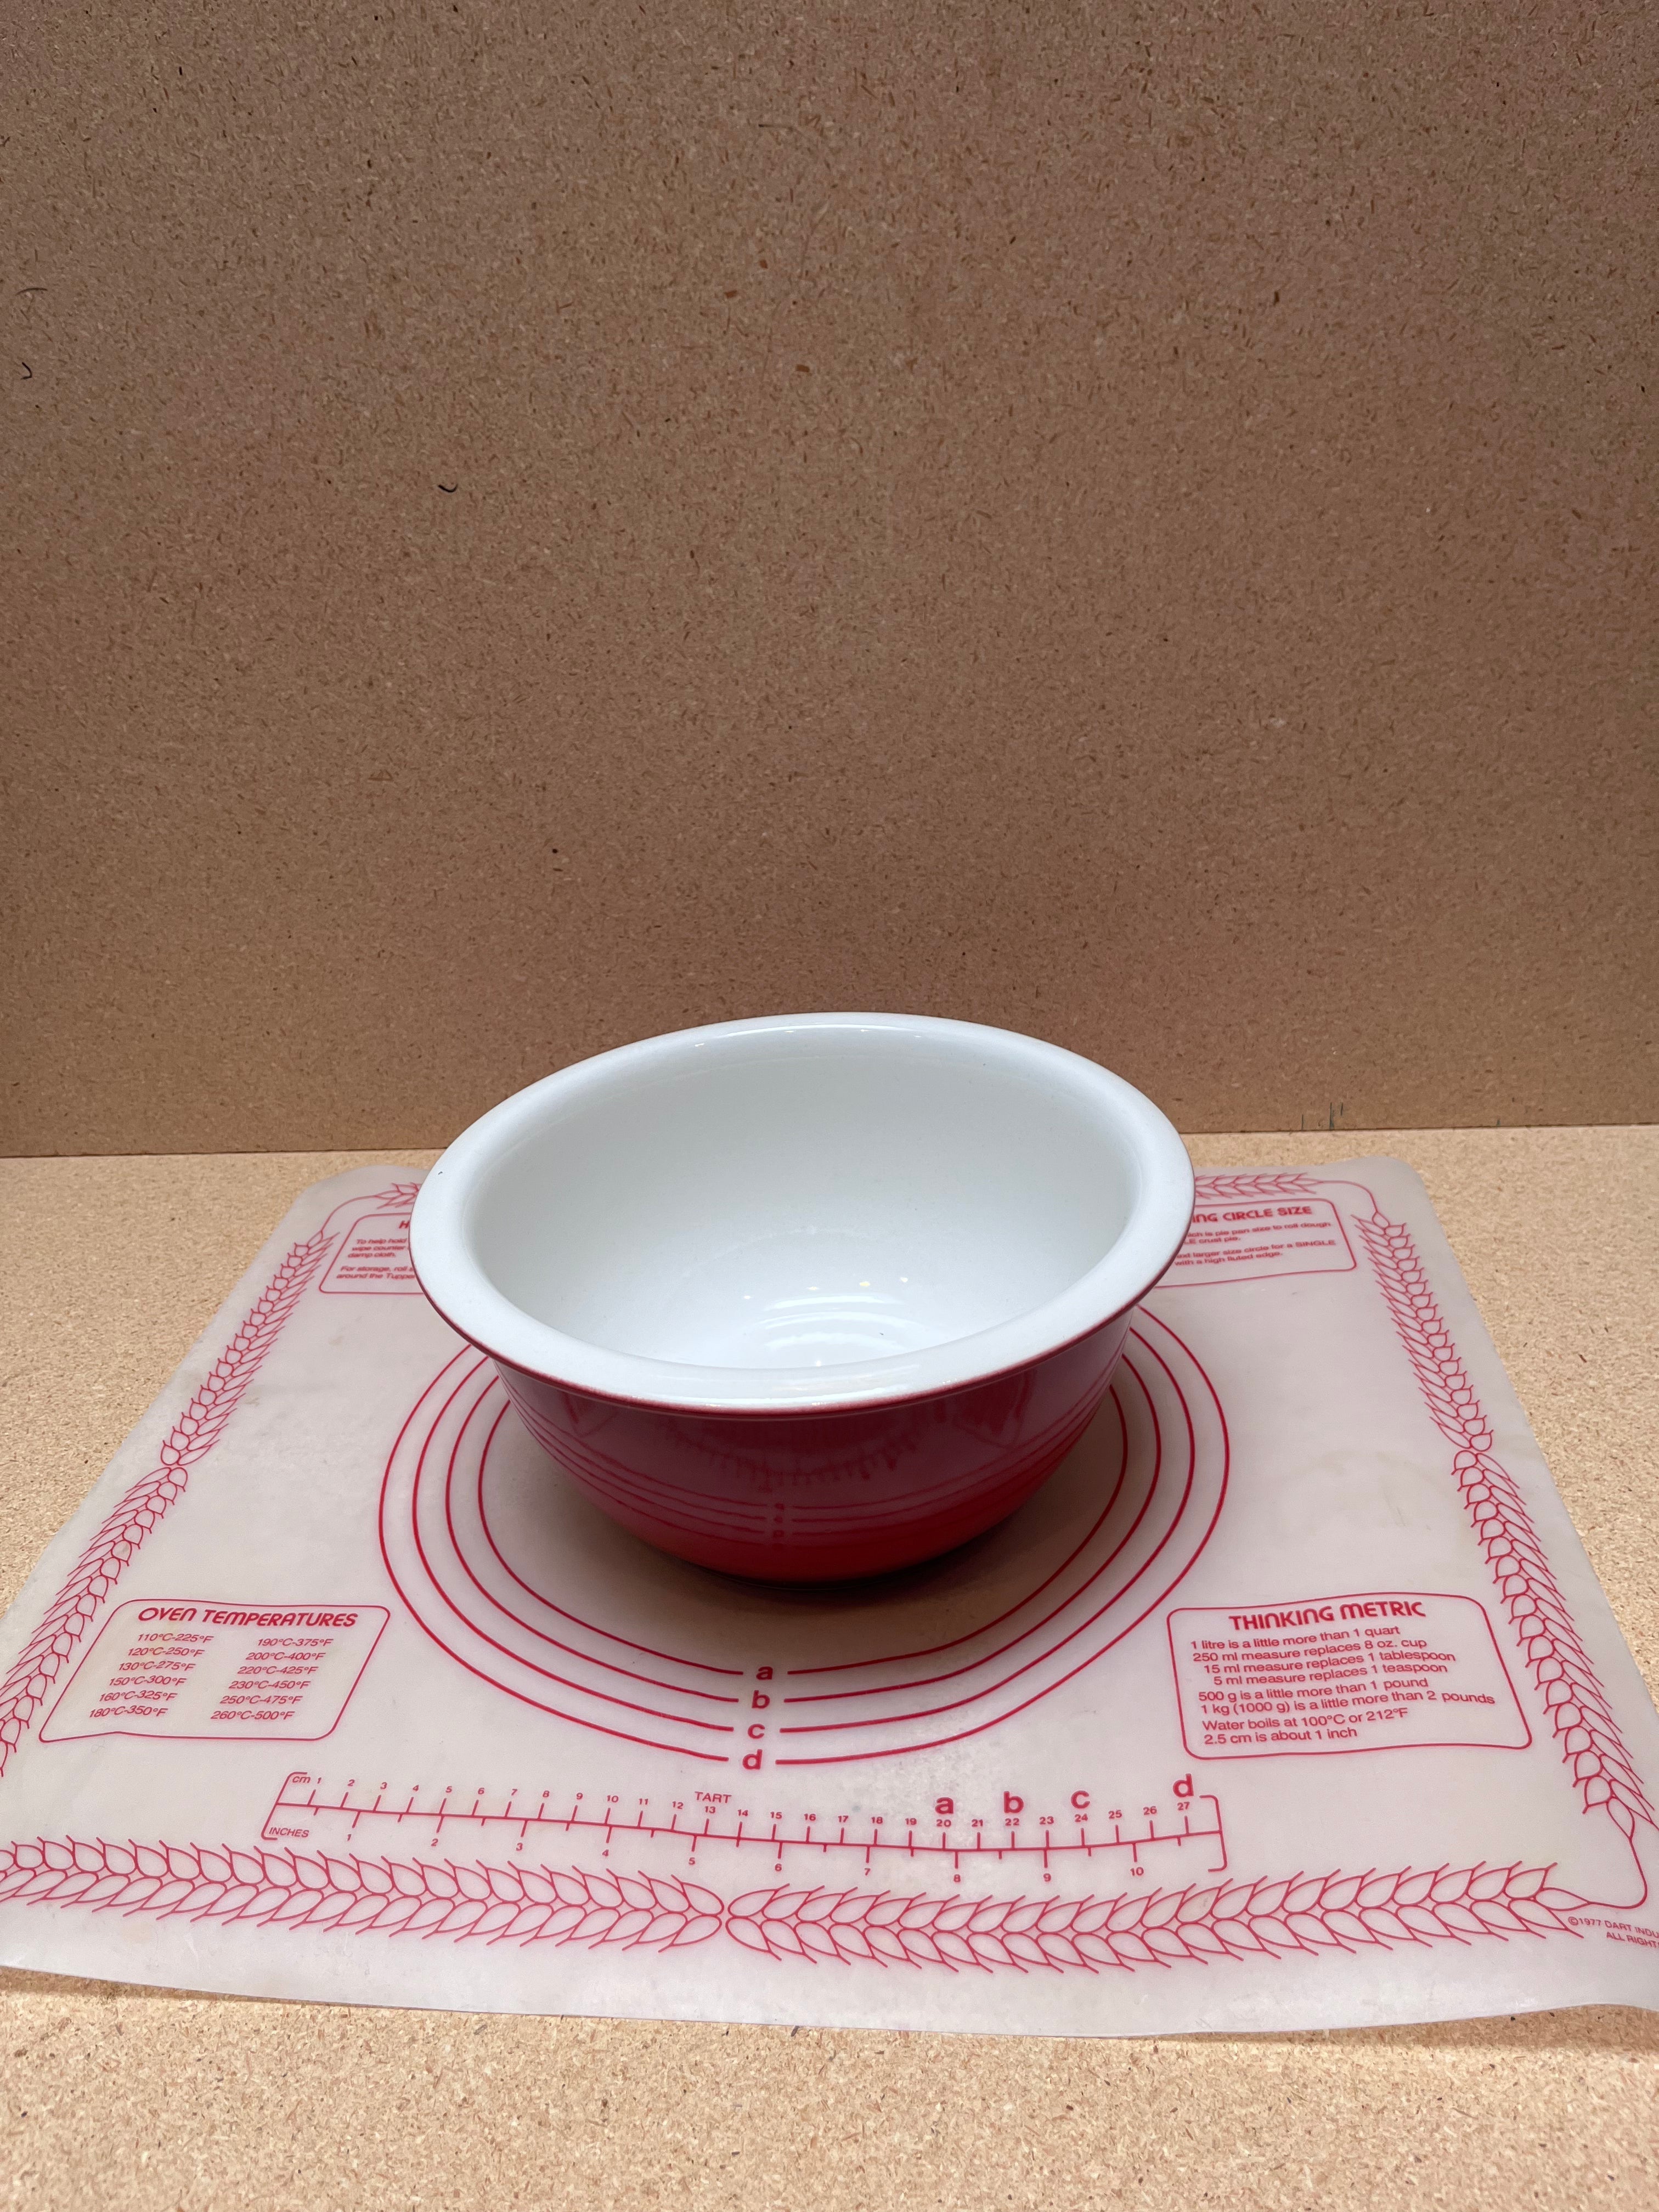 Lot #38 - Pastry mat and red mixing bowl